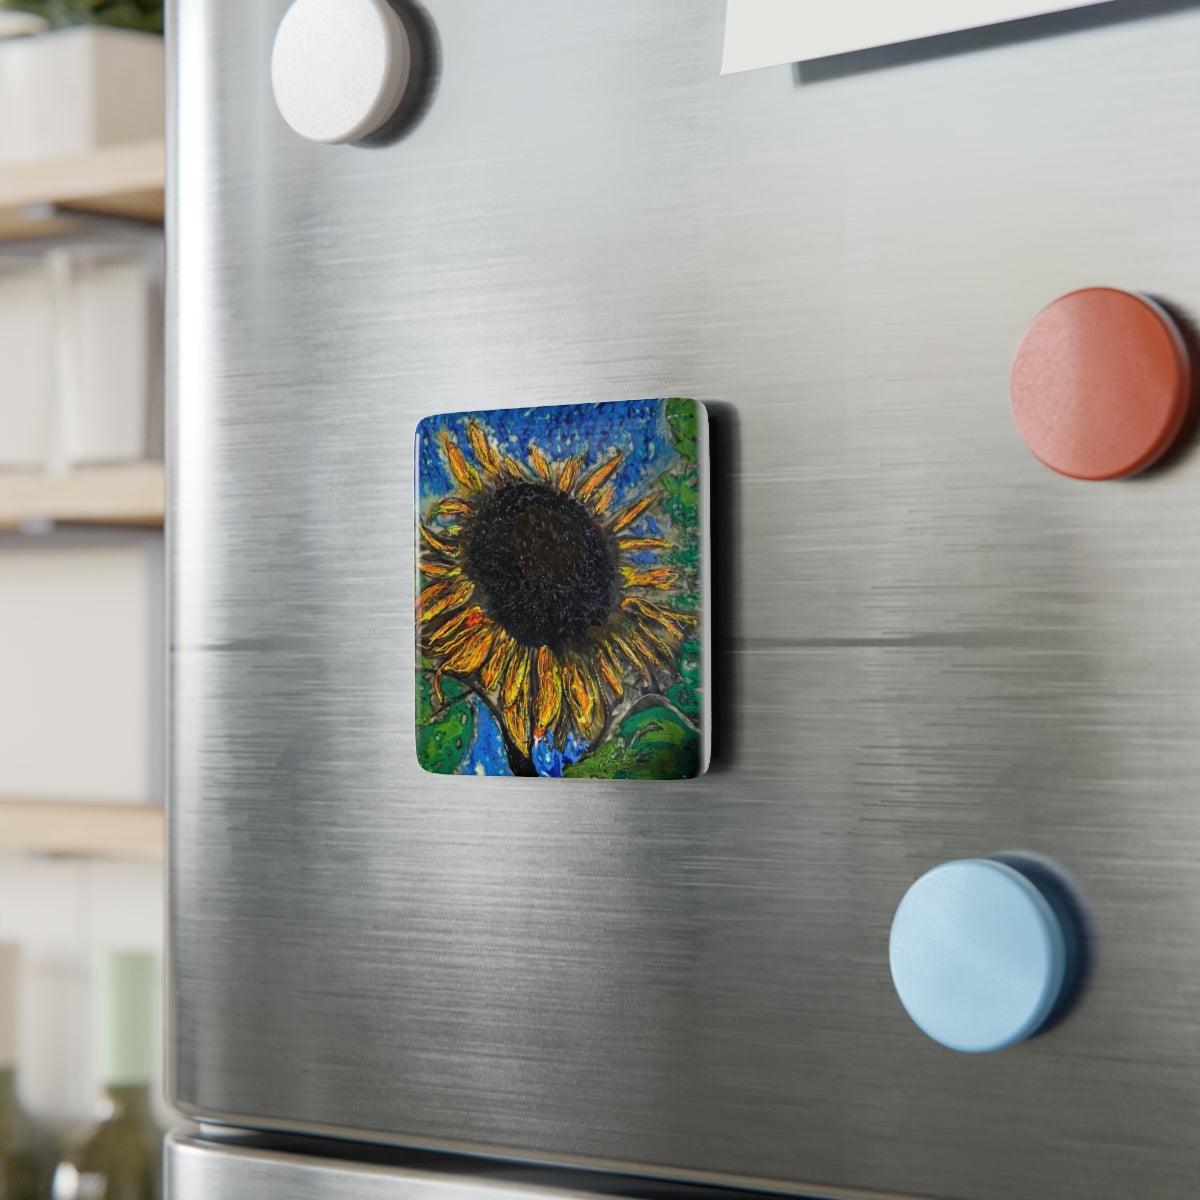 "Summer In Italy" Porcelain Magnet, Square-Home Decor - Mike Giannella - Encaustic Painting - Mixed Media Artist - Art Prints